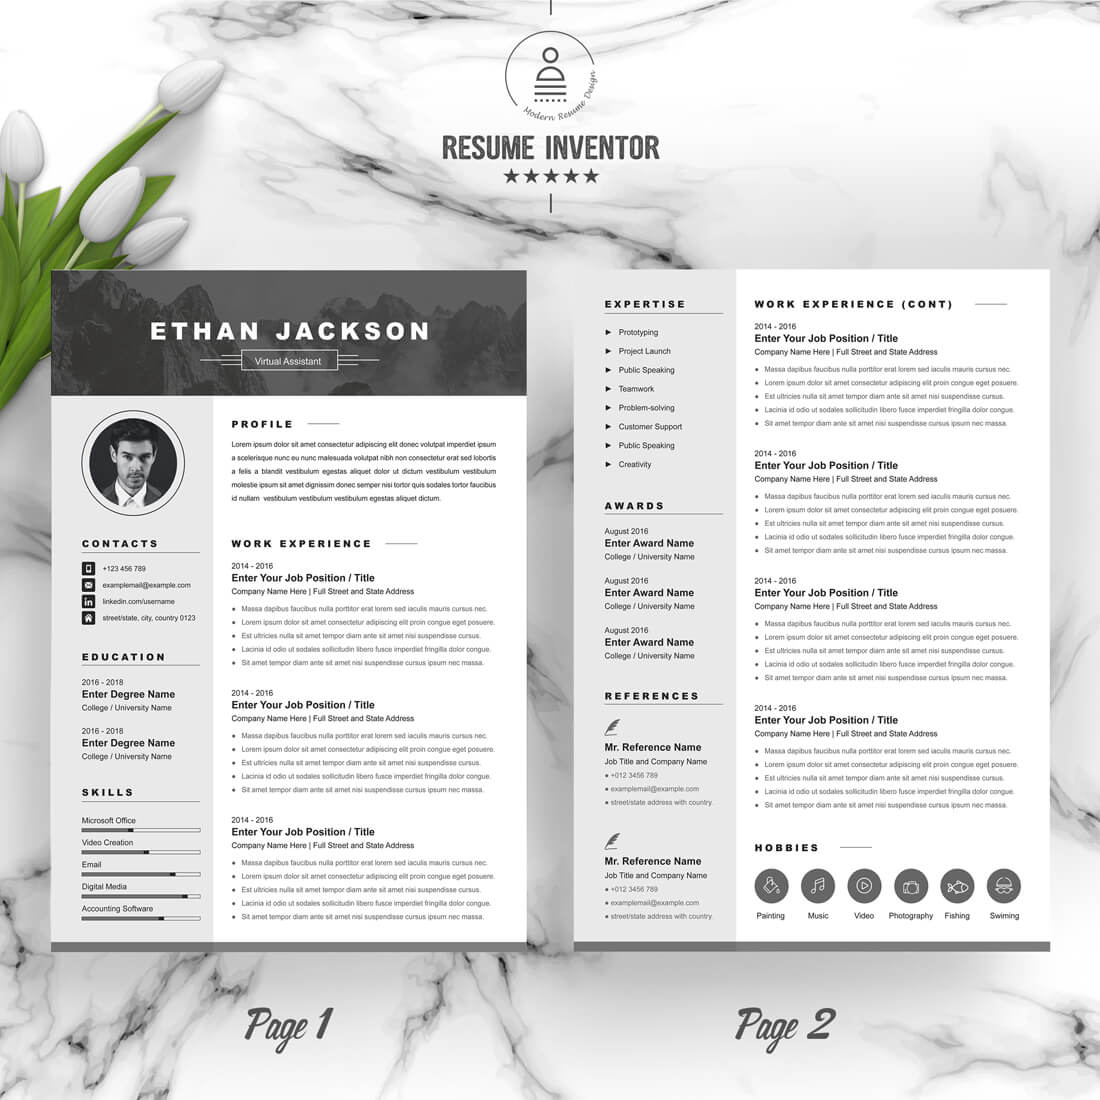 Virtual Assistant Resume Template cover image.